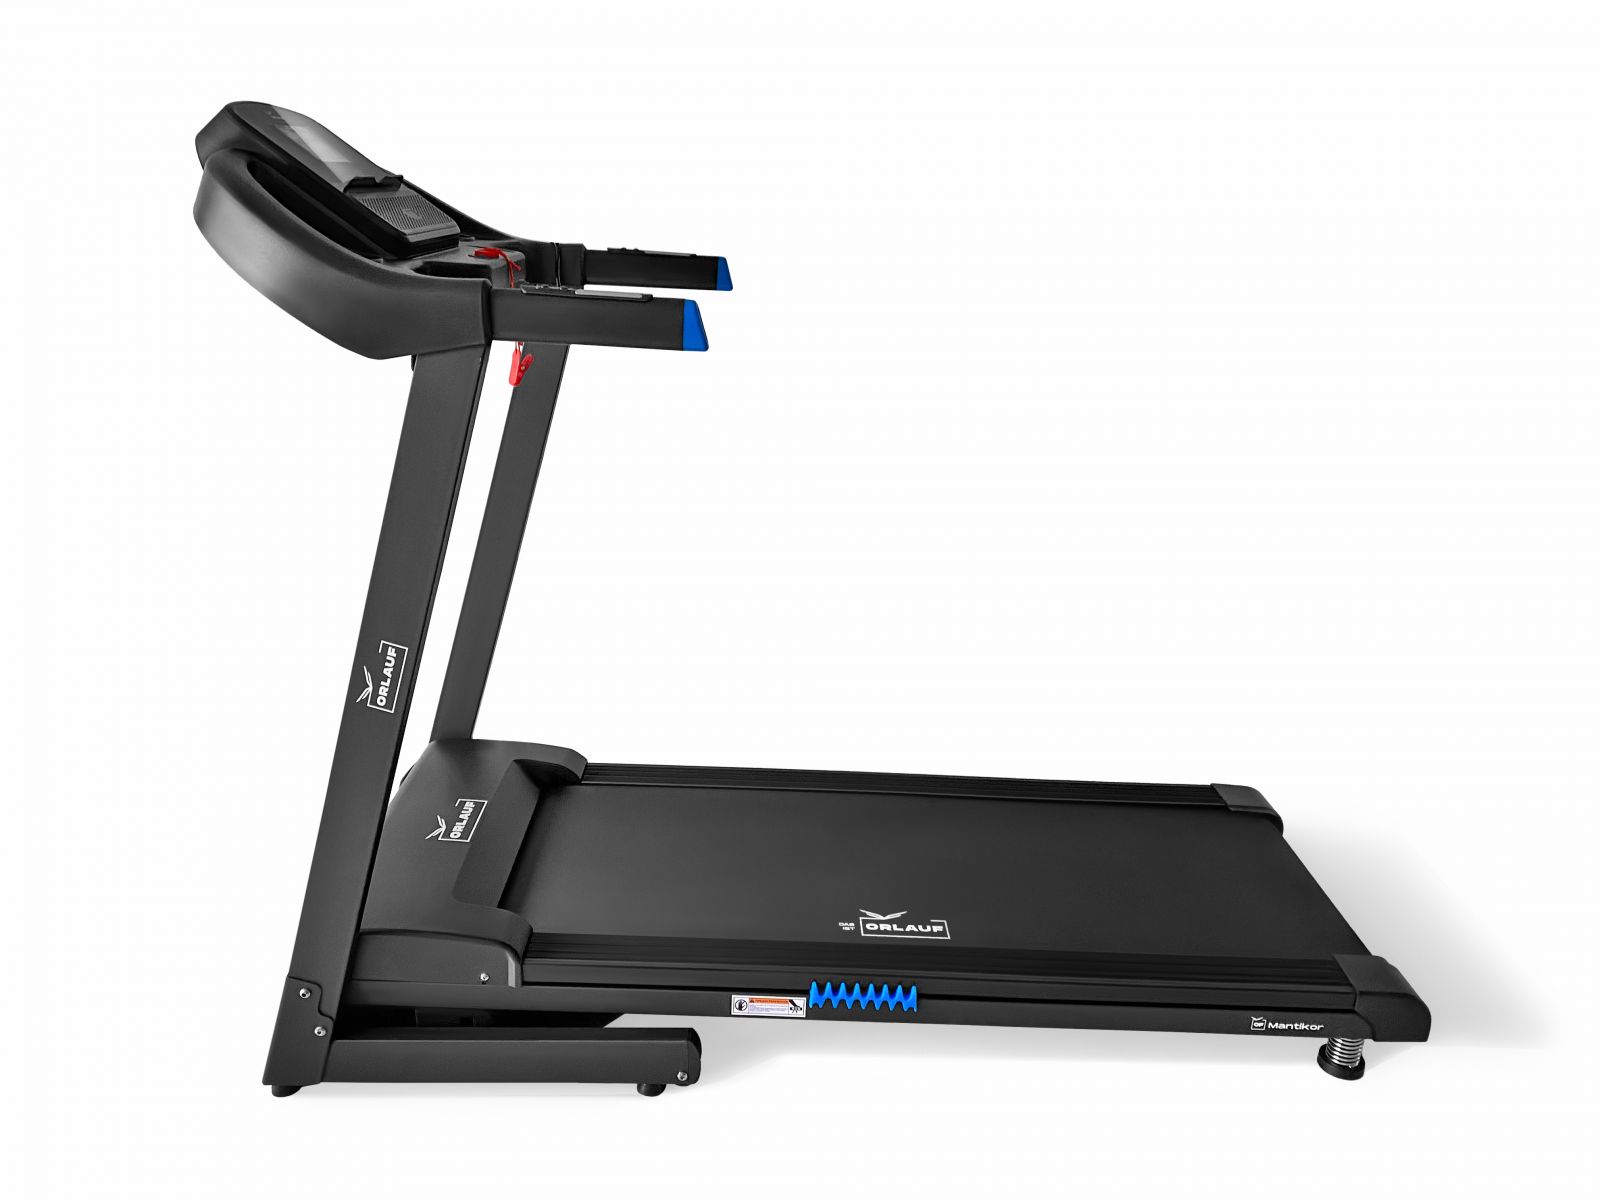 Photo of the Orlauf Mantikor treadmill - for mobile device users